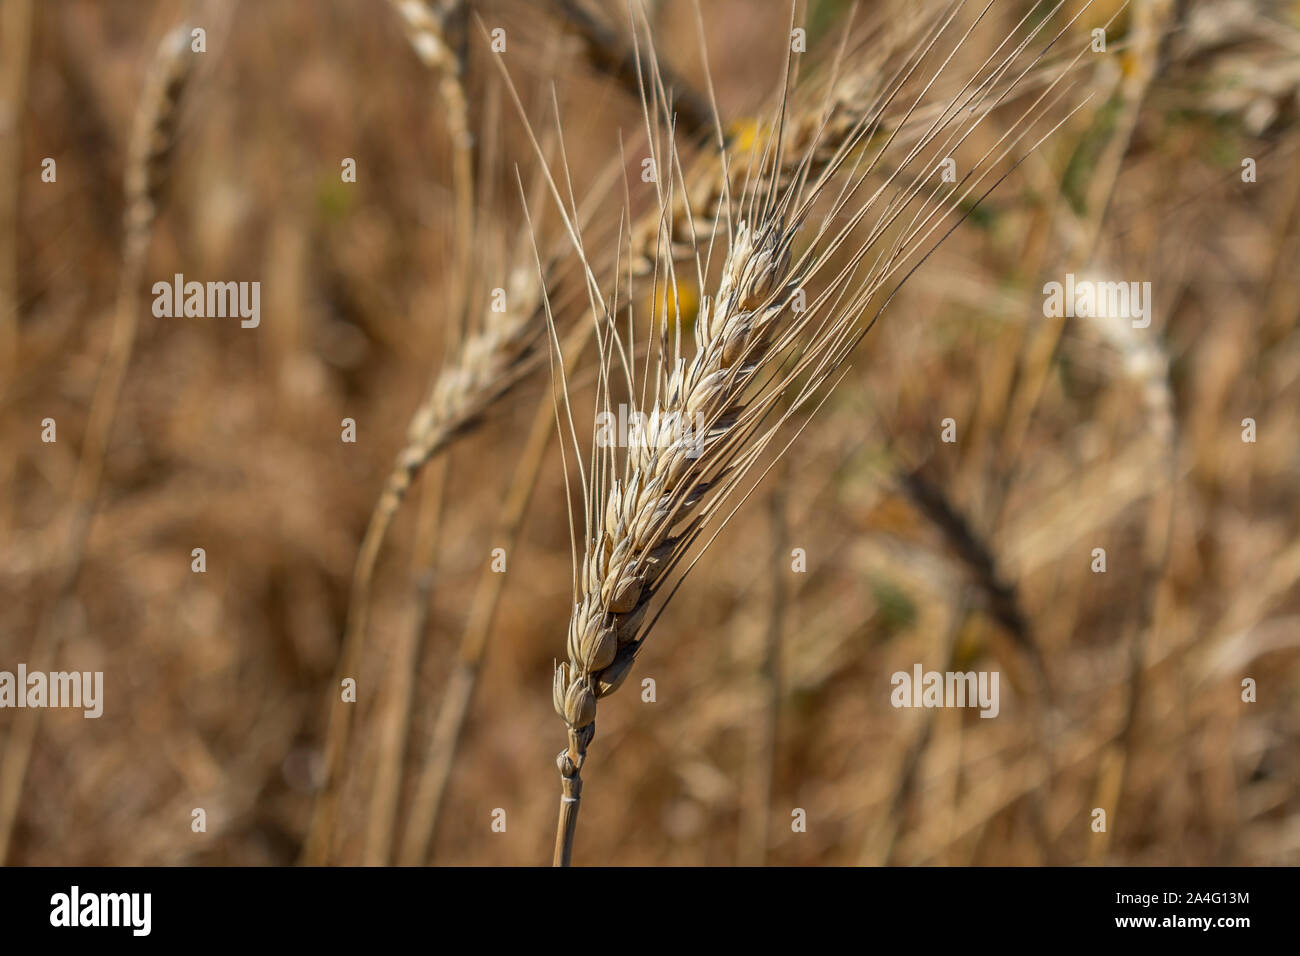 Organic golden wheat spike closeup ready for harvest growing in a field Stock Photo